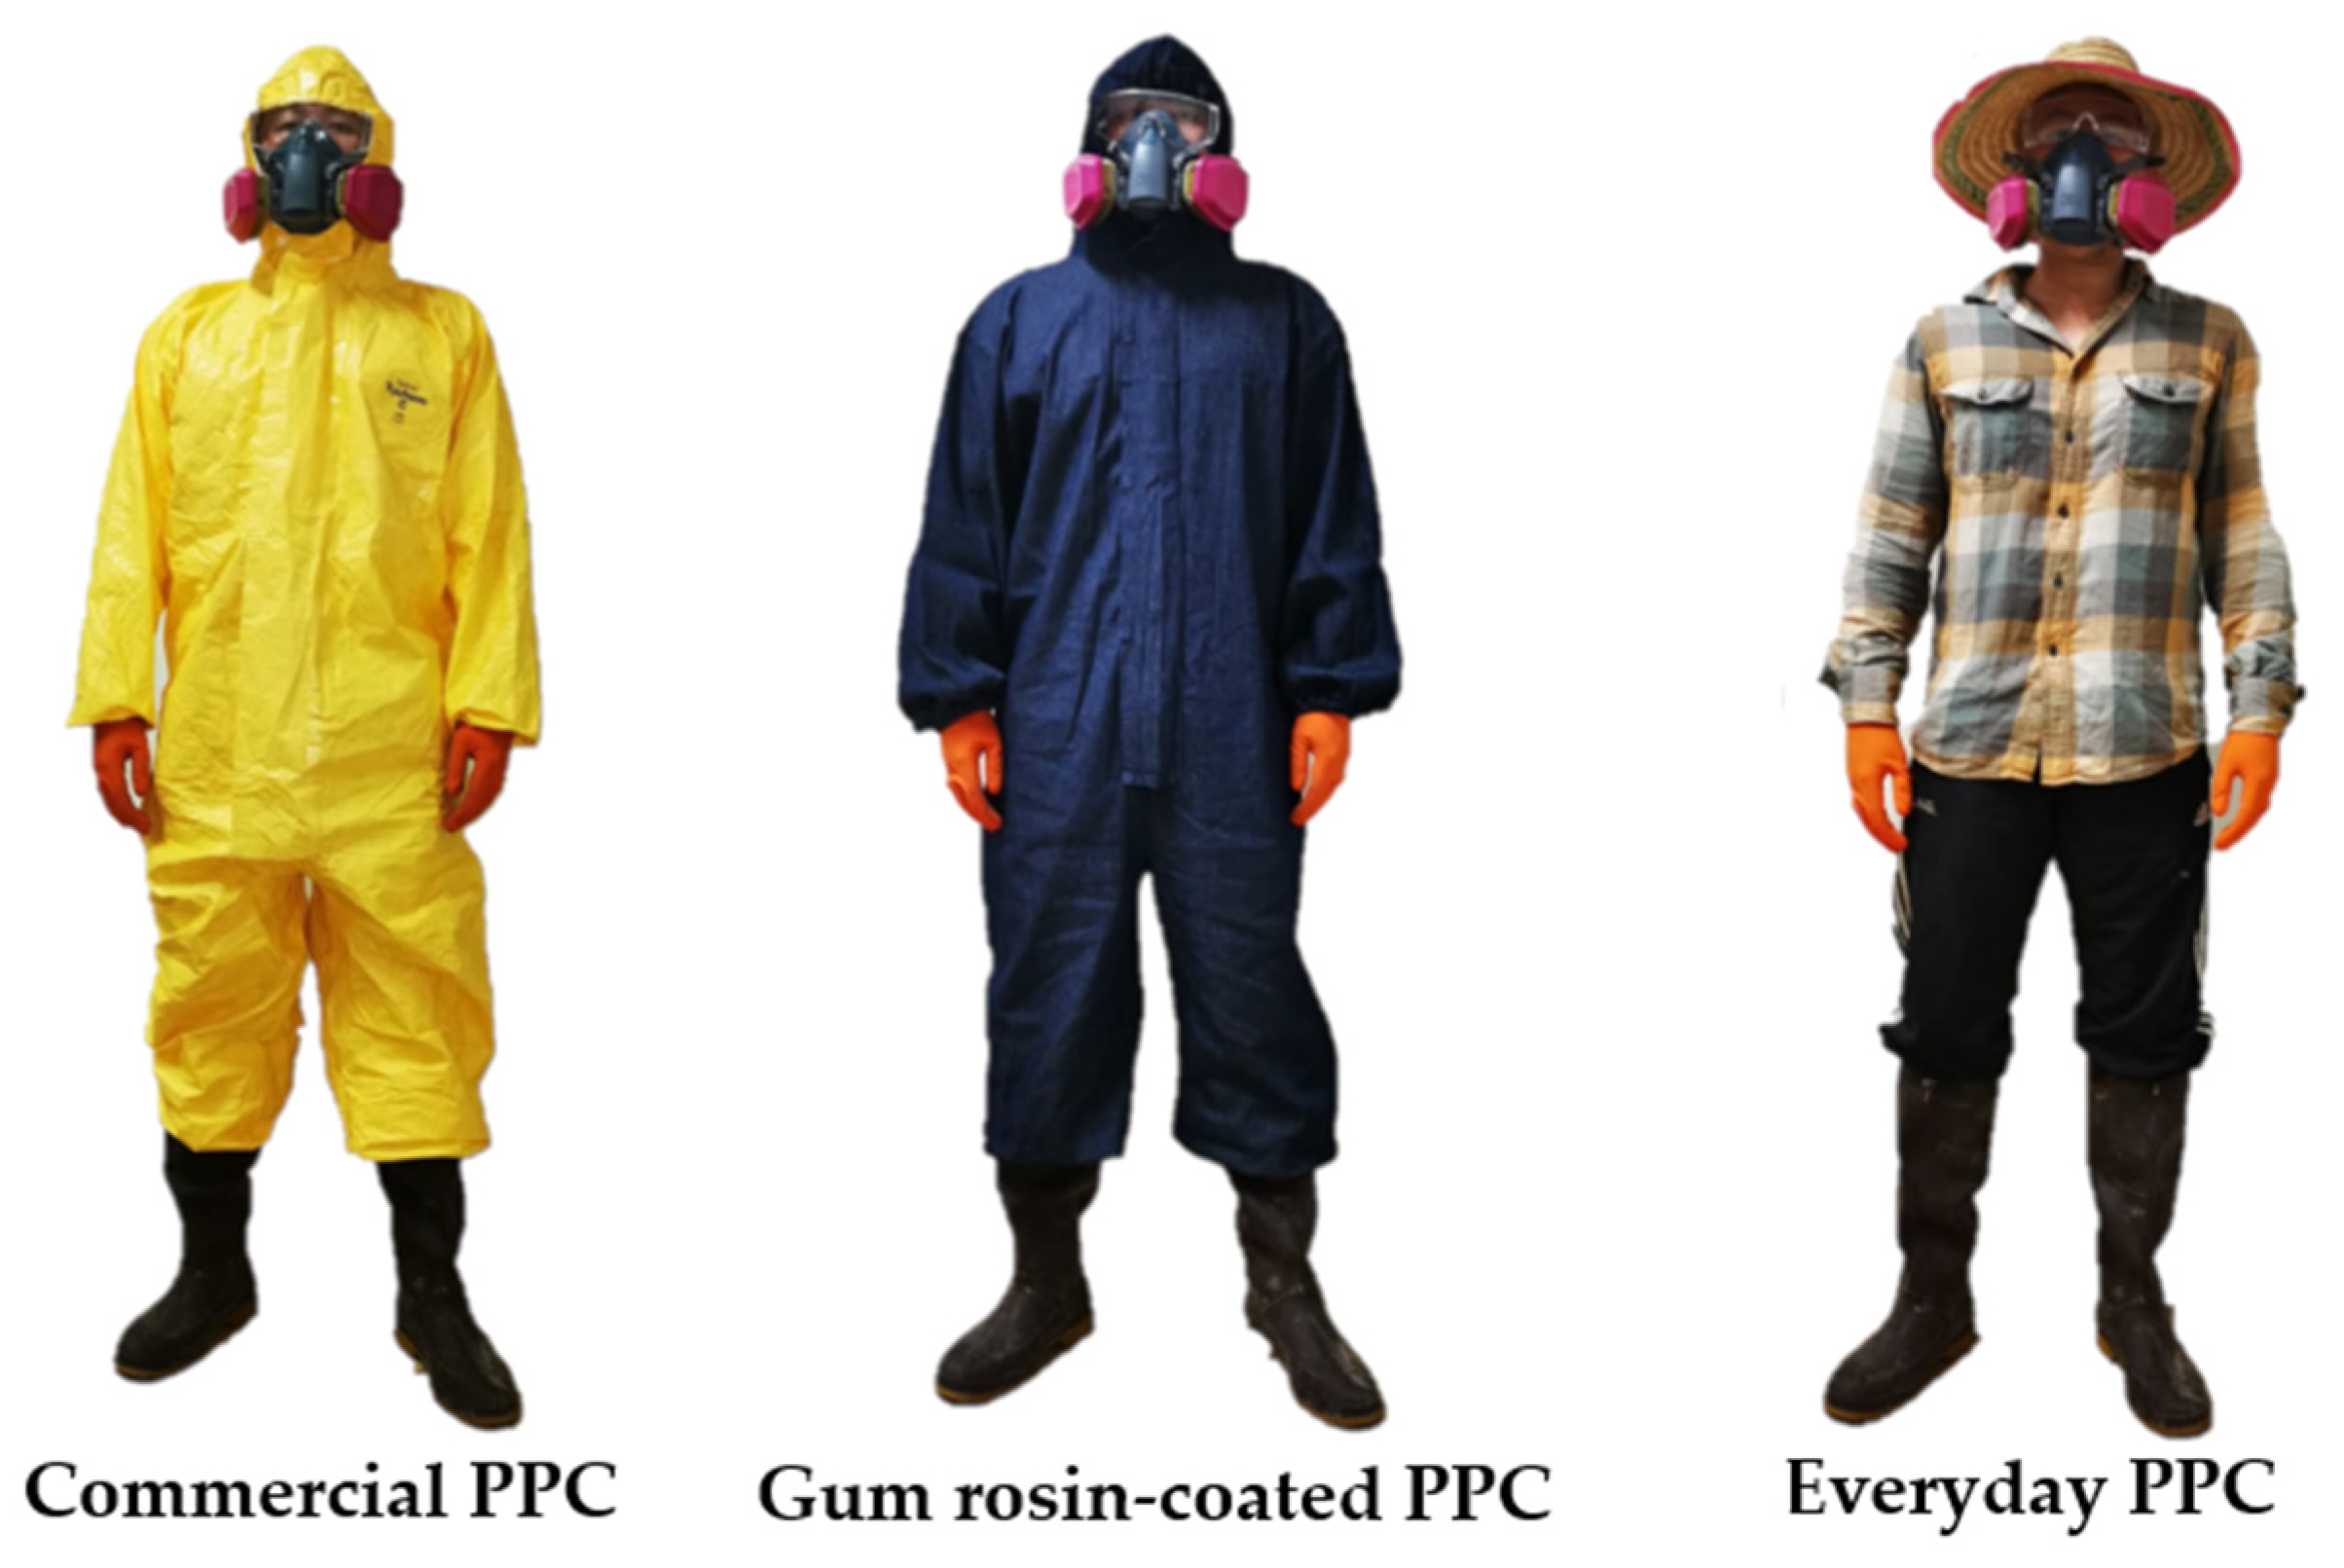 IJERPH | Free Full-Text | Efficiency of Gum Rosin-Coated Personal  Protective Clothing to Protect against Chlorpyrifos Exposure in Applicators